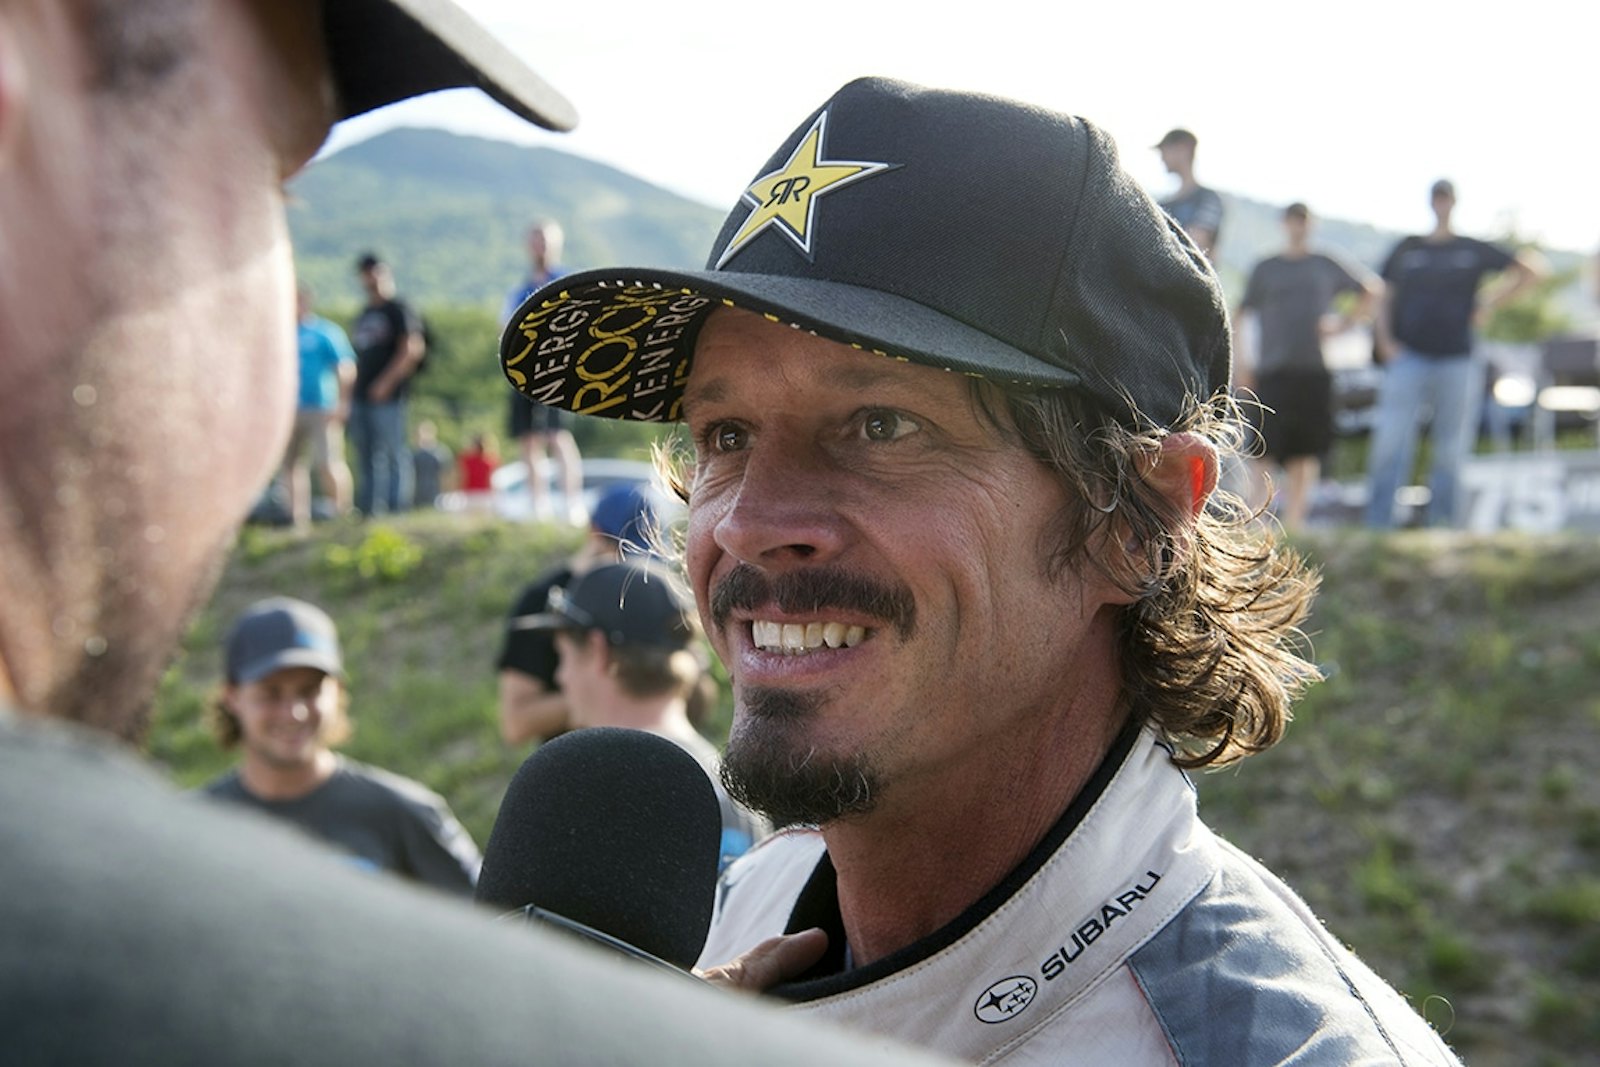 Bucky Lasek is all smiles after a strong showing at New England Forest Rally